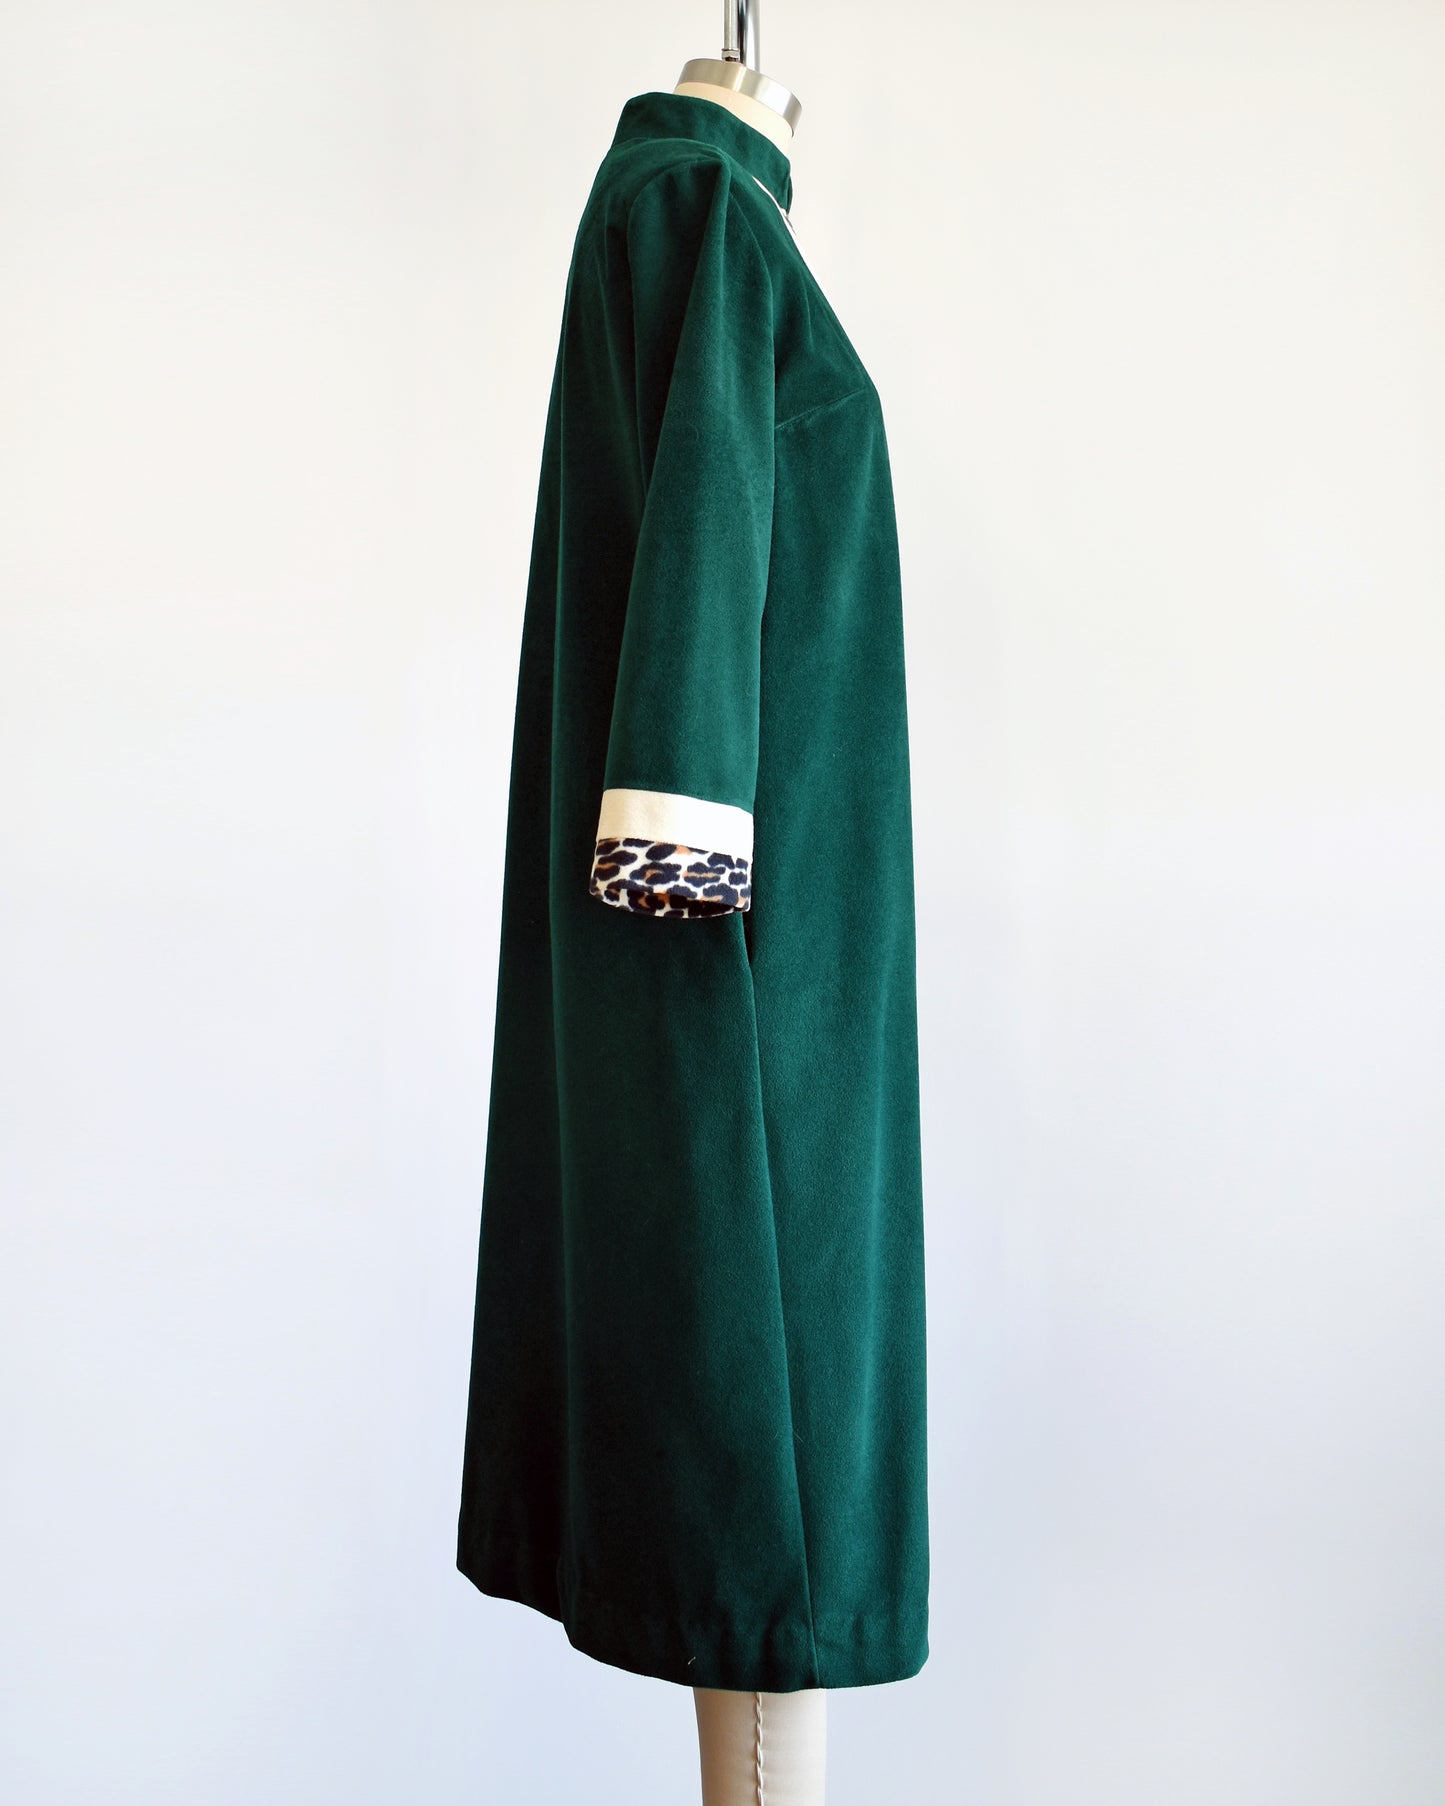 Side view of a vintage 1970s robe by Vanity Fair that is a rich dark green with a white and leopard print stripe going down the front and matching stripes on the cuffs.